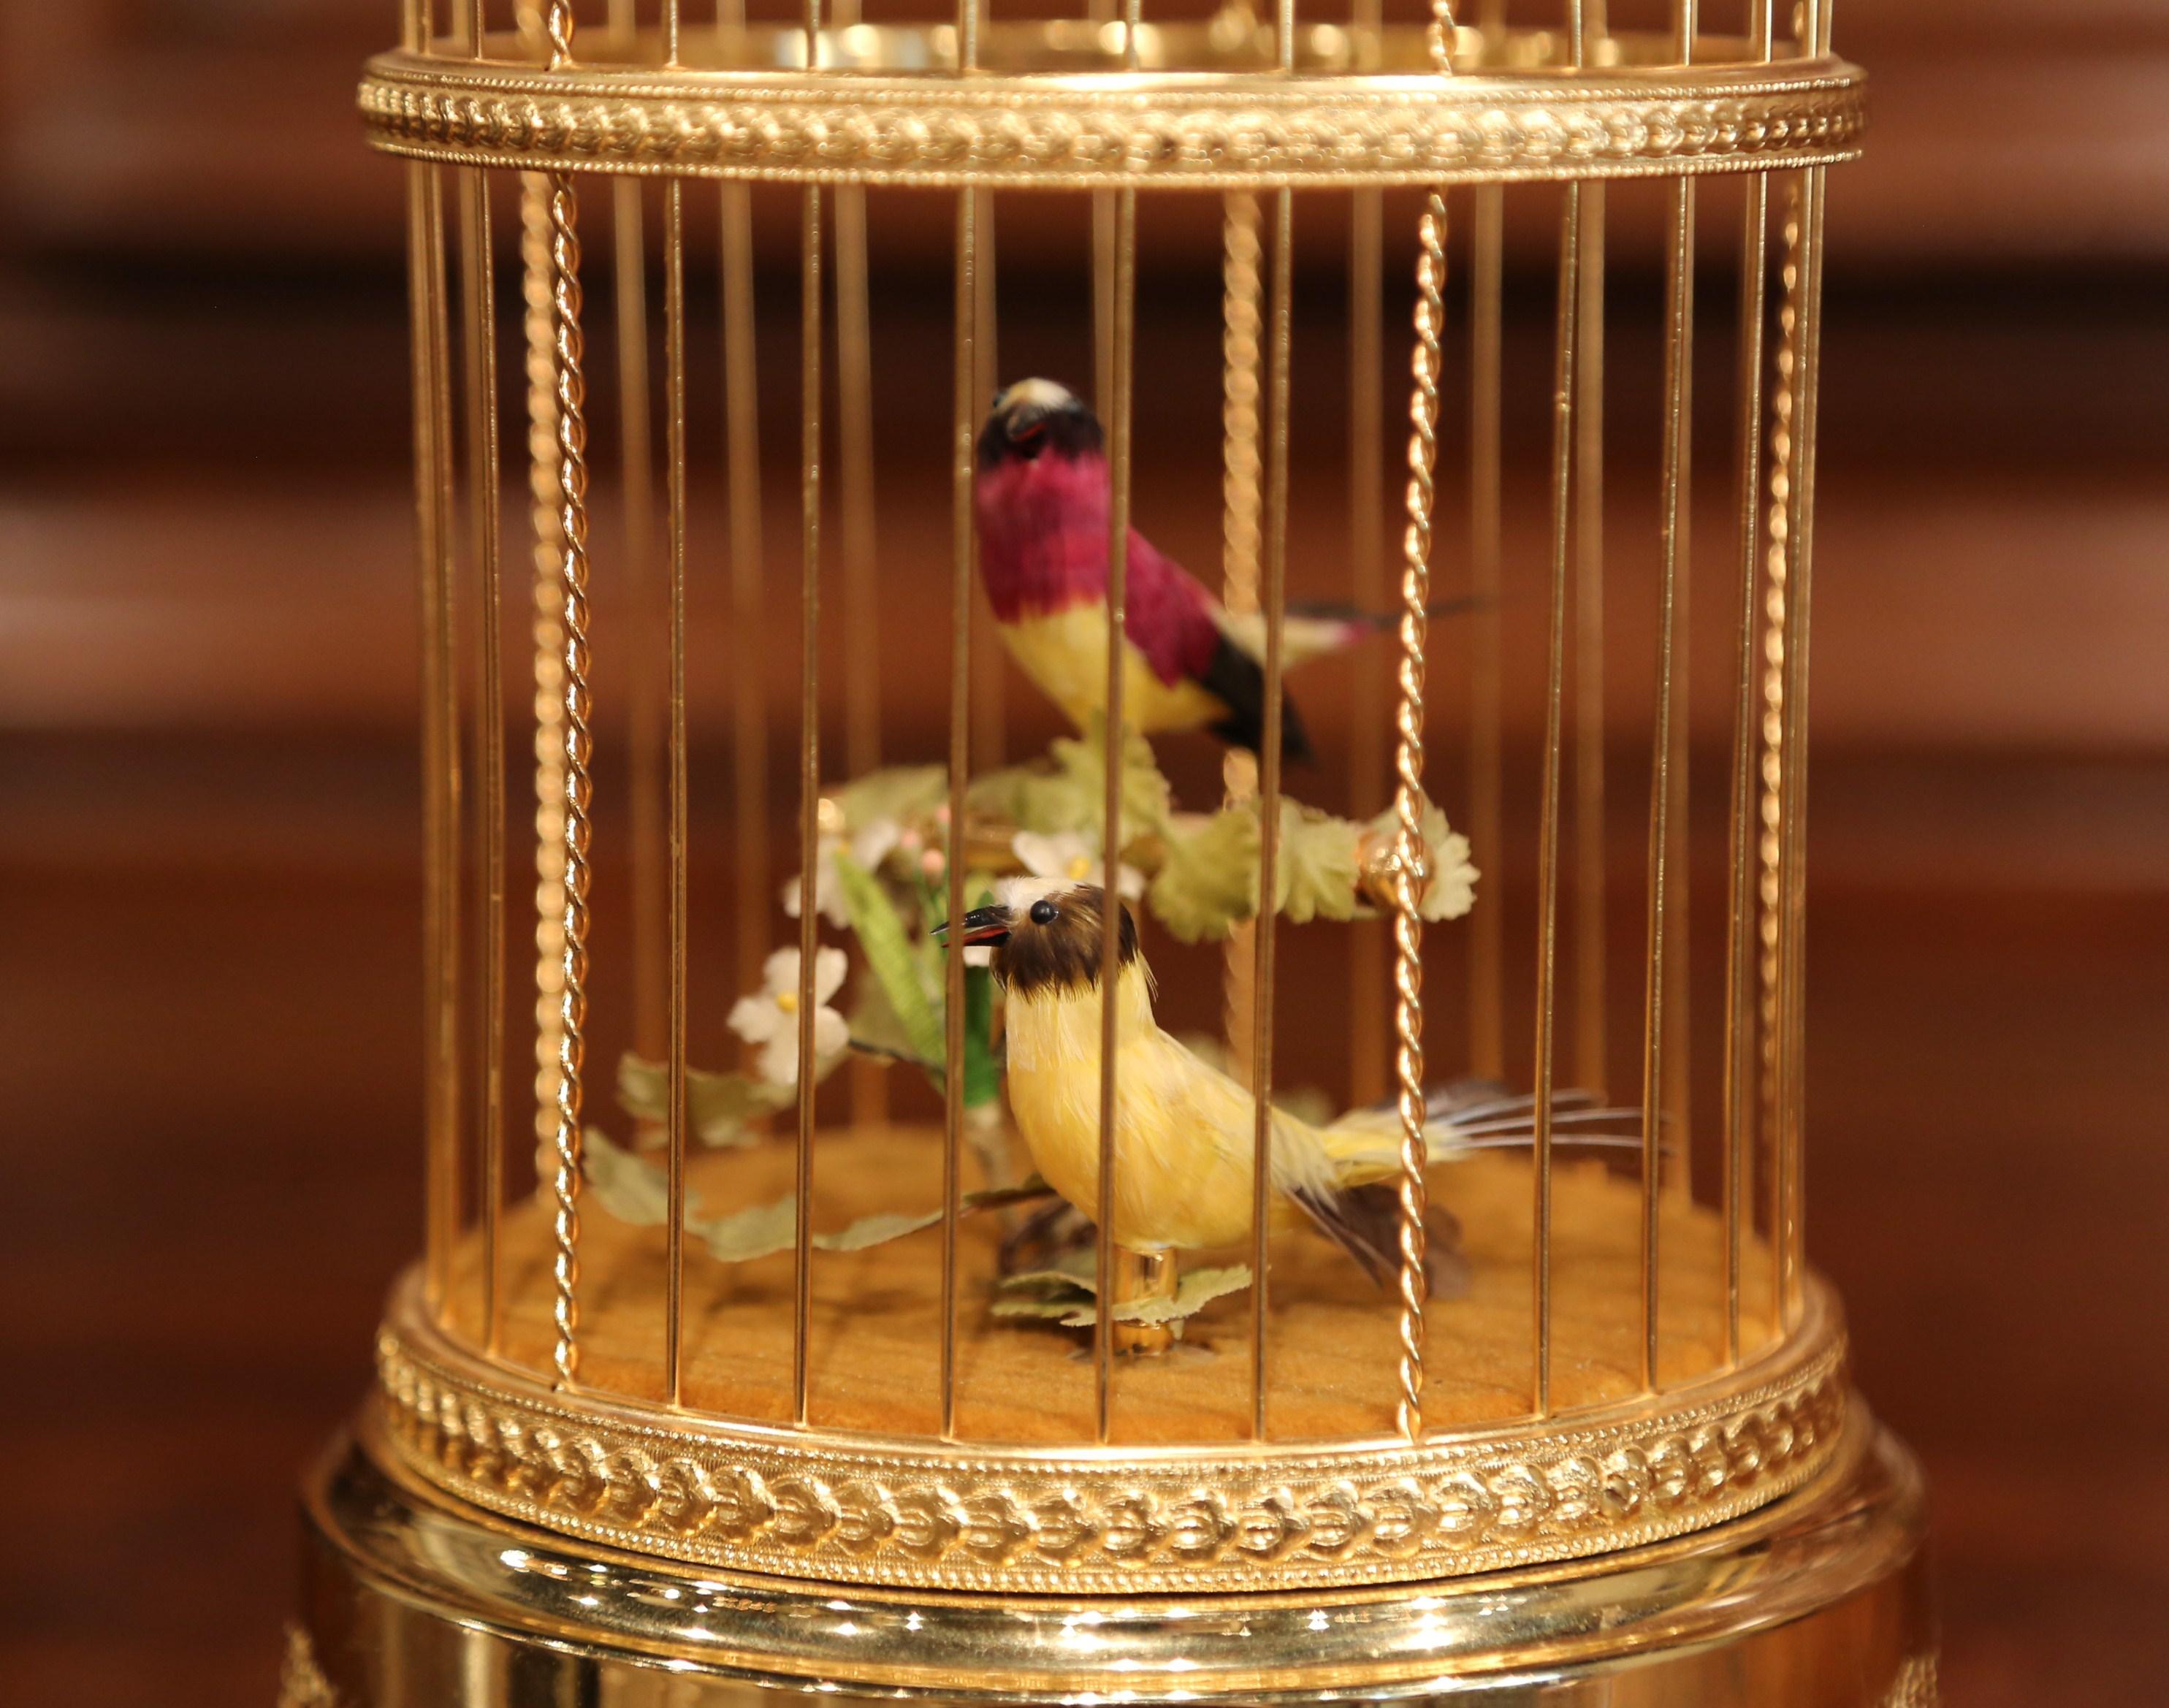 Bring life to your house with this colorful vintage birdcage. Crafted by Reuge Music in Switzerland circa 1980, the cage is cylindrical in shape and topped with a rounded dome. Inside the gilded cage, there are two miniature automaton birds. The